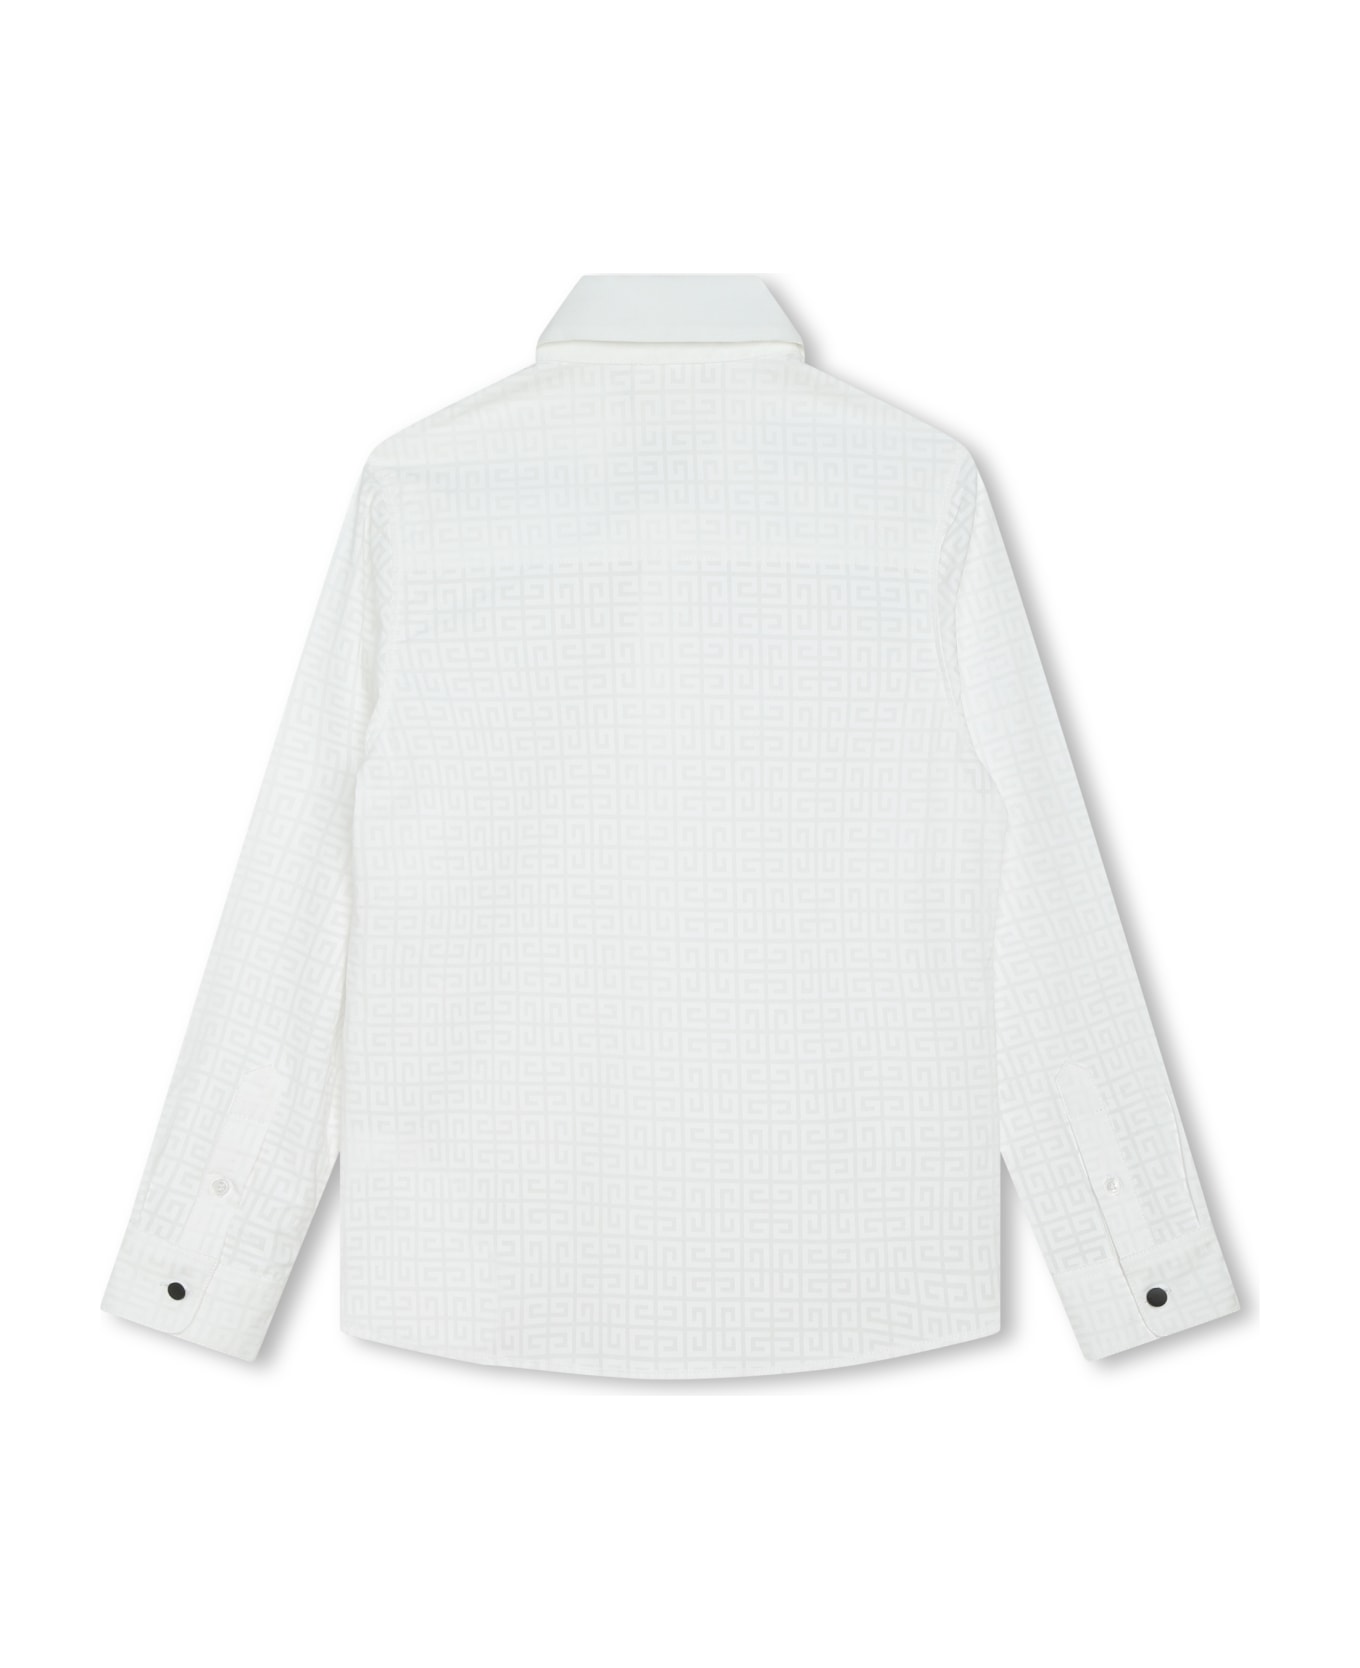 Givenchy Shirt With 4g Motif - White